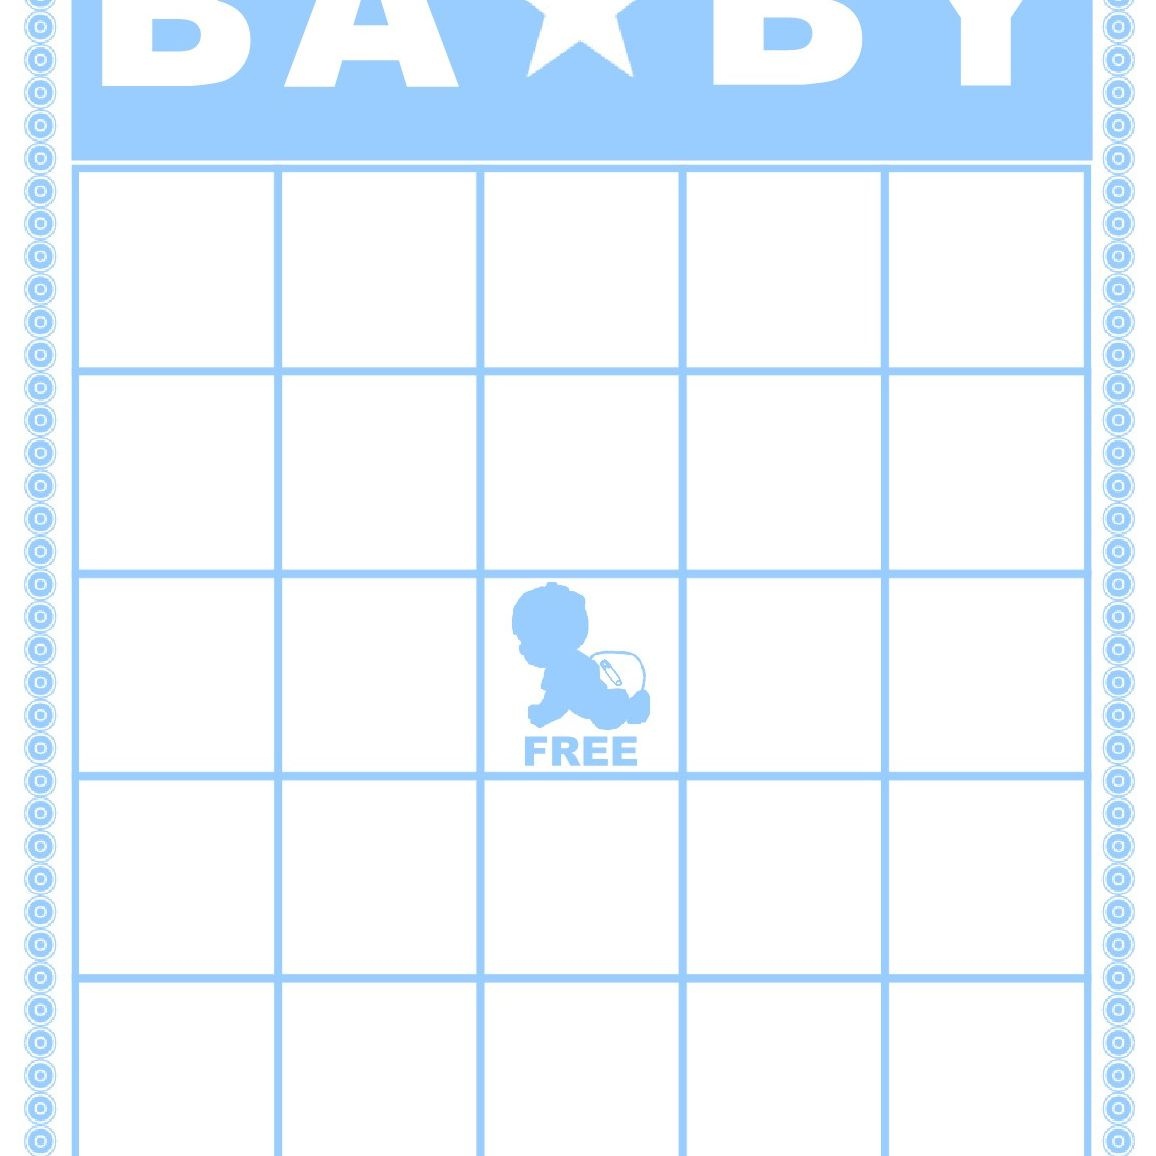 Free Baby Shower Bingo Cards Your Guests Will Love - Free Printable Baby Shower Bingo Blank Cards